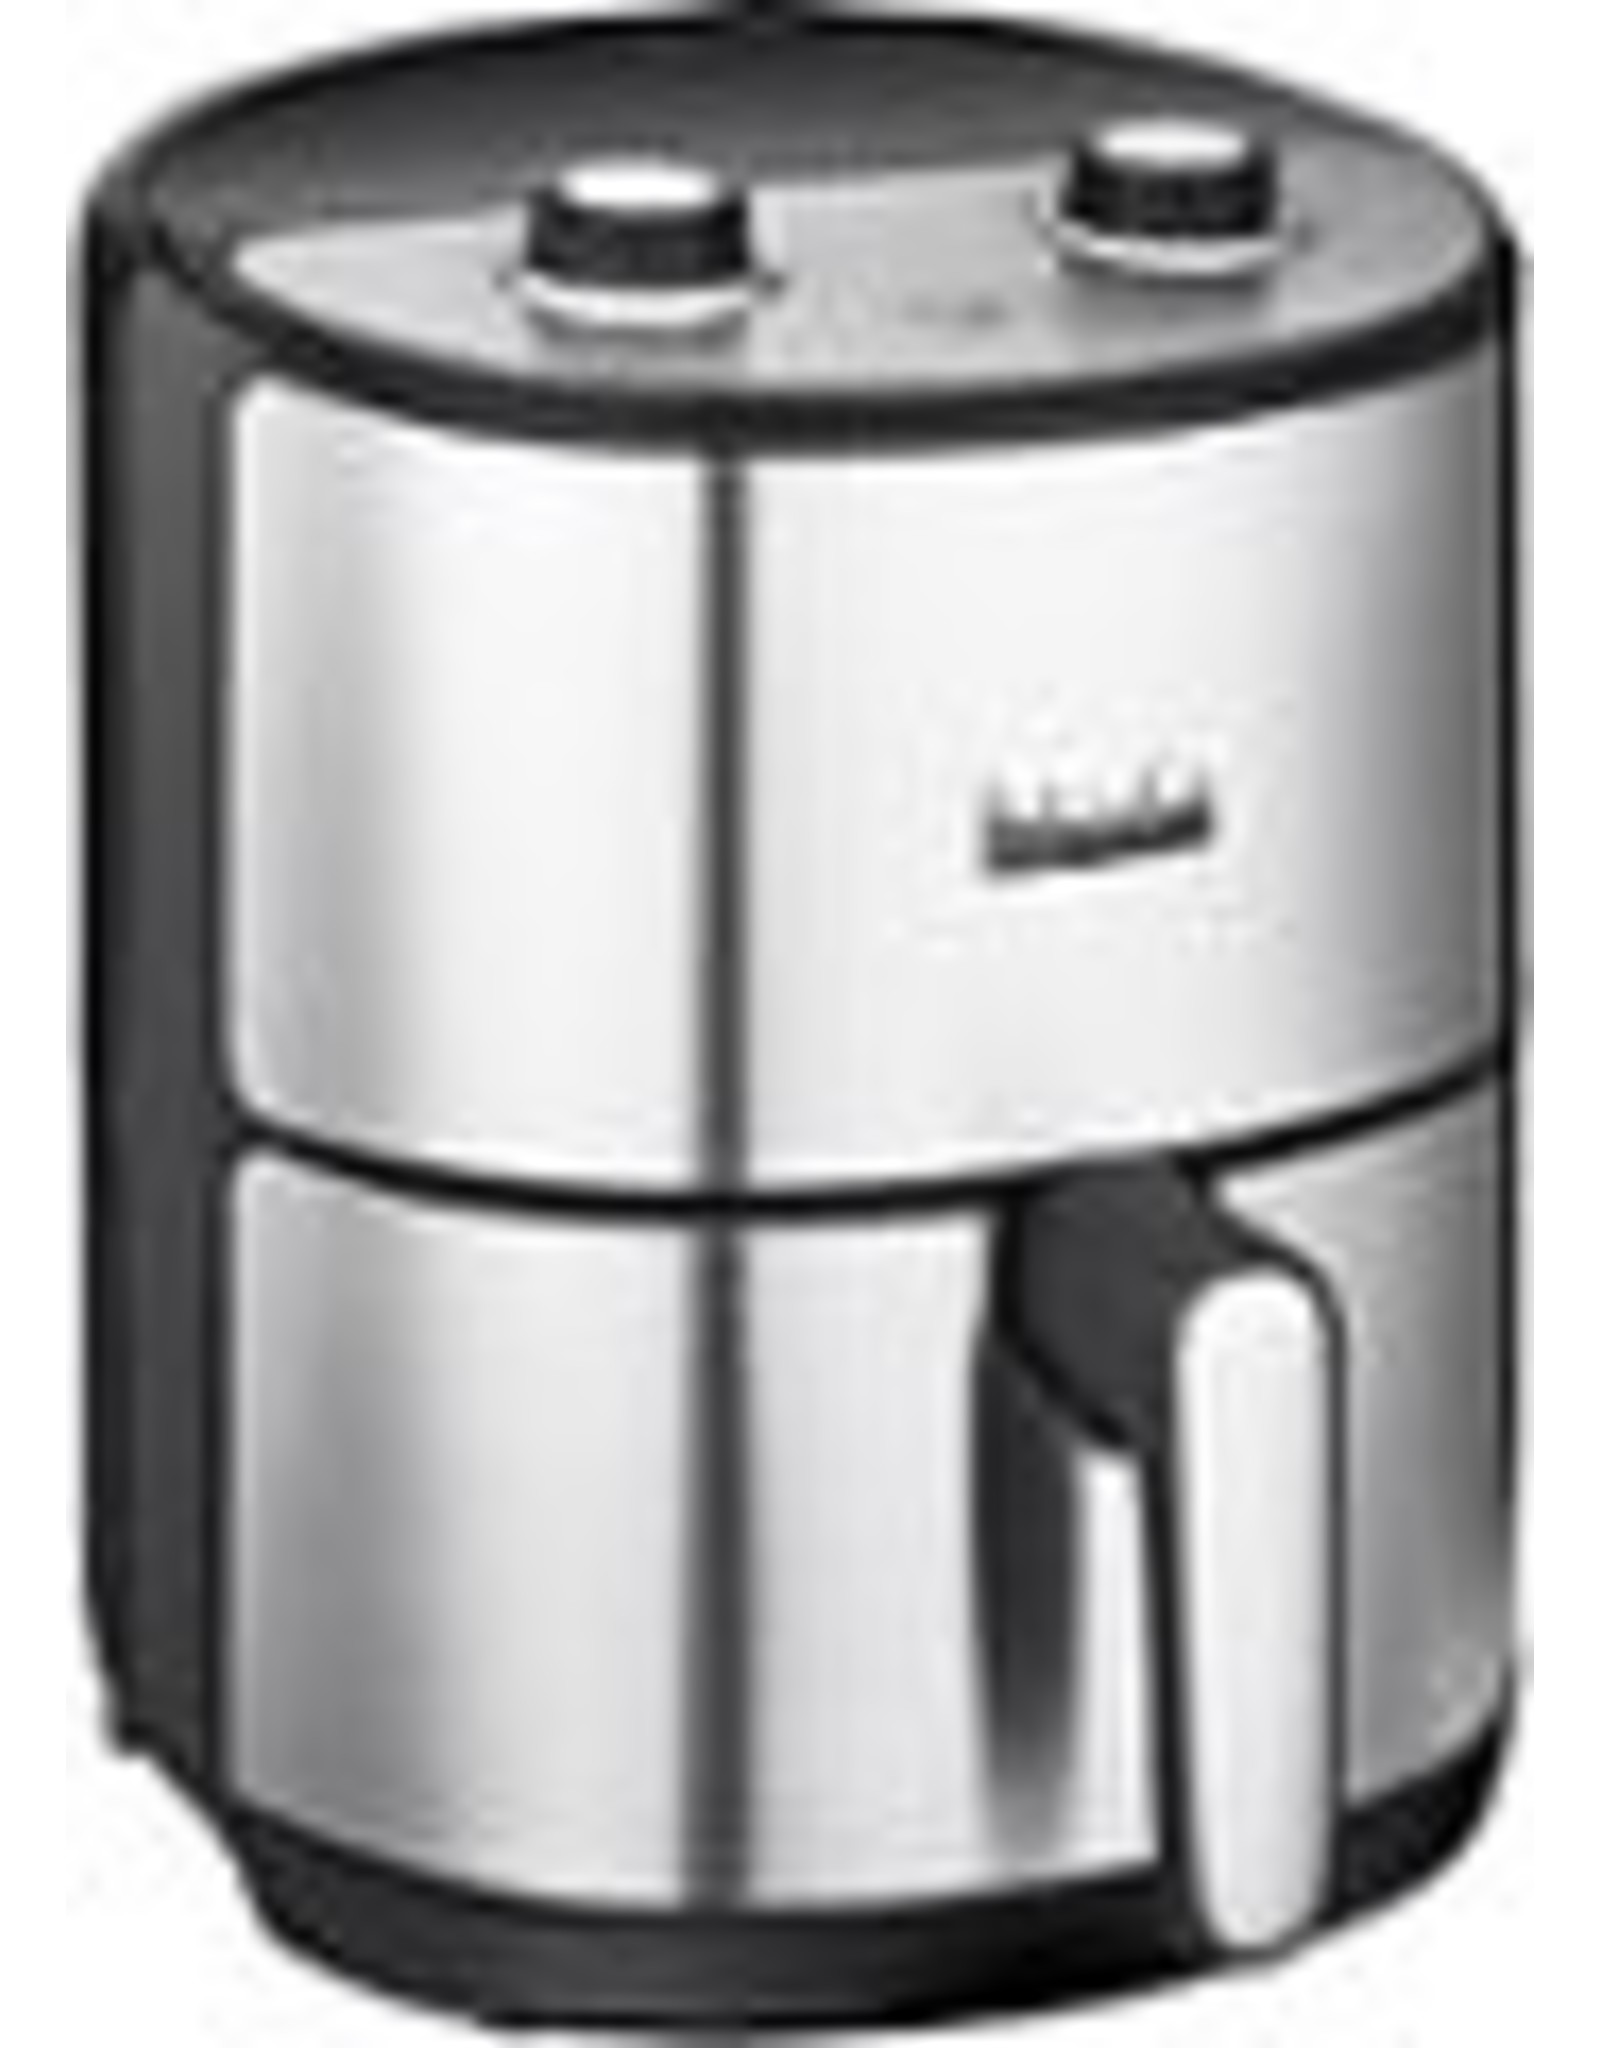 Bella pro . Color	Stainless Steel Capacity	4.3 Quarts Material